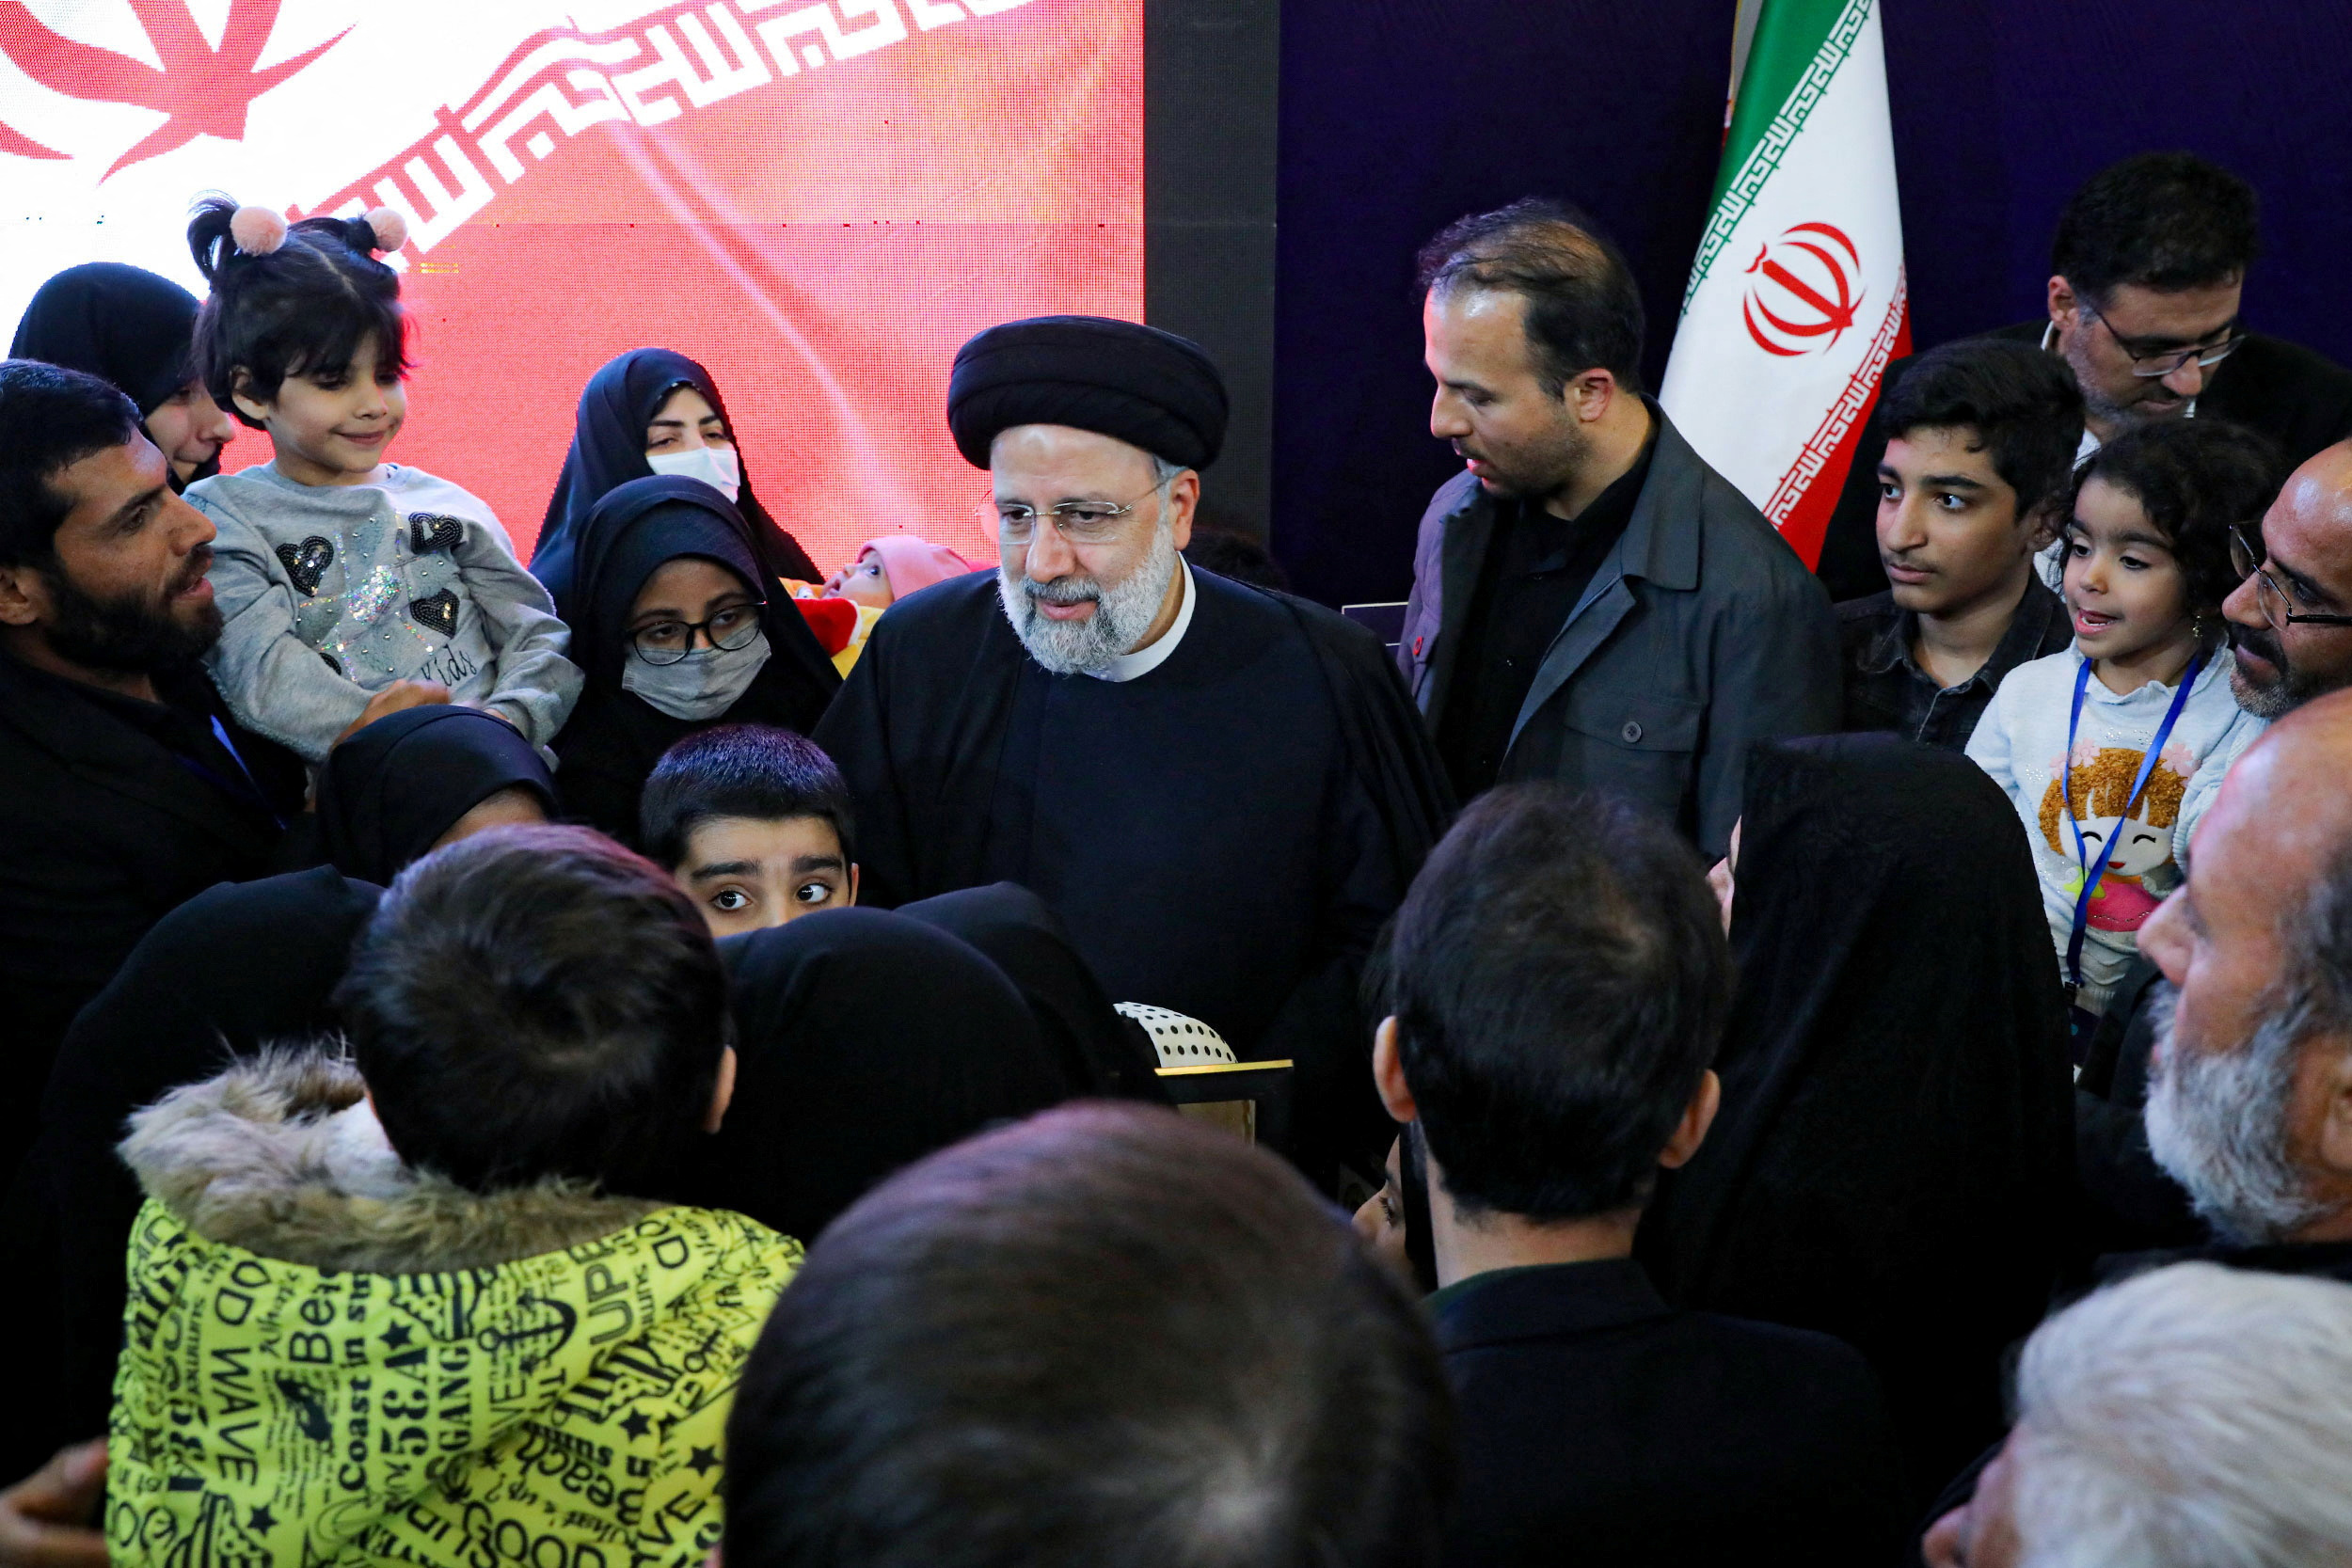 Iranian President Ebrahim Raisi meets with the families of security forces killed during Iran's protests, in Tehran